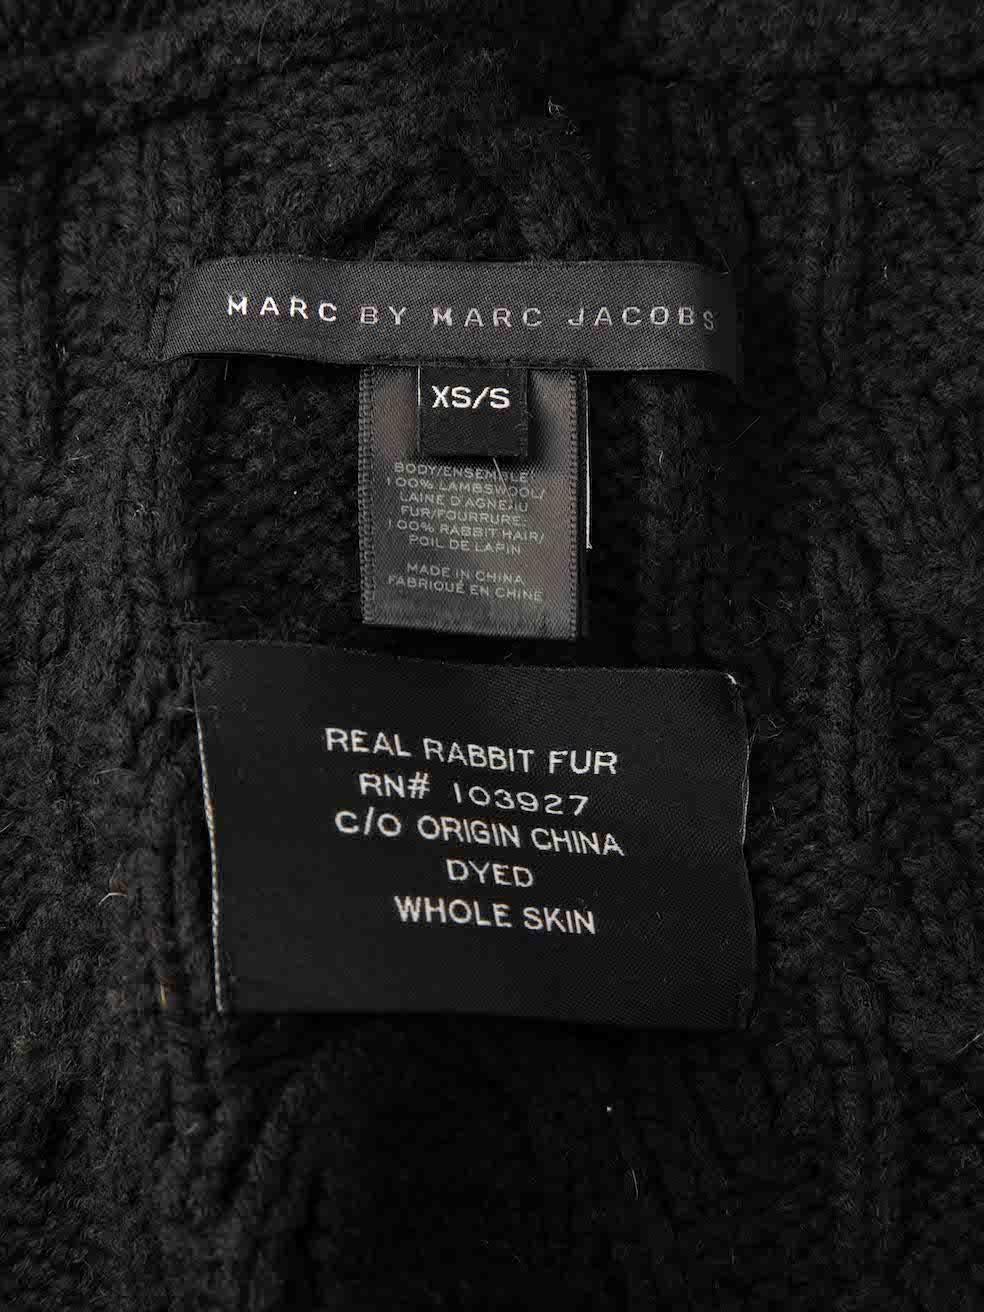 Marc Jacobs Women's Marc by Marc Jacobs Black Rabbit Fur Knitted Gilet 1